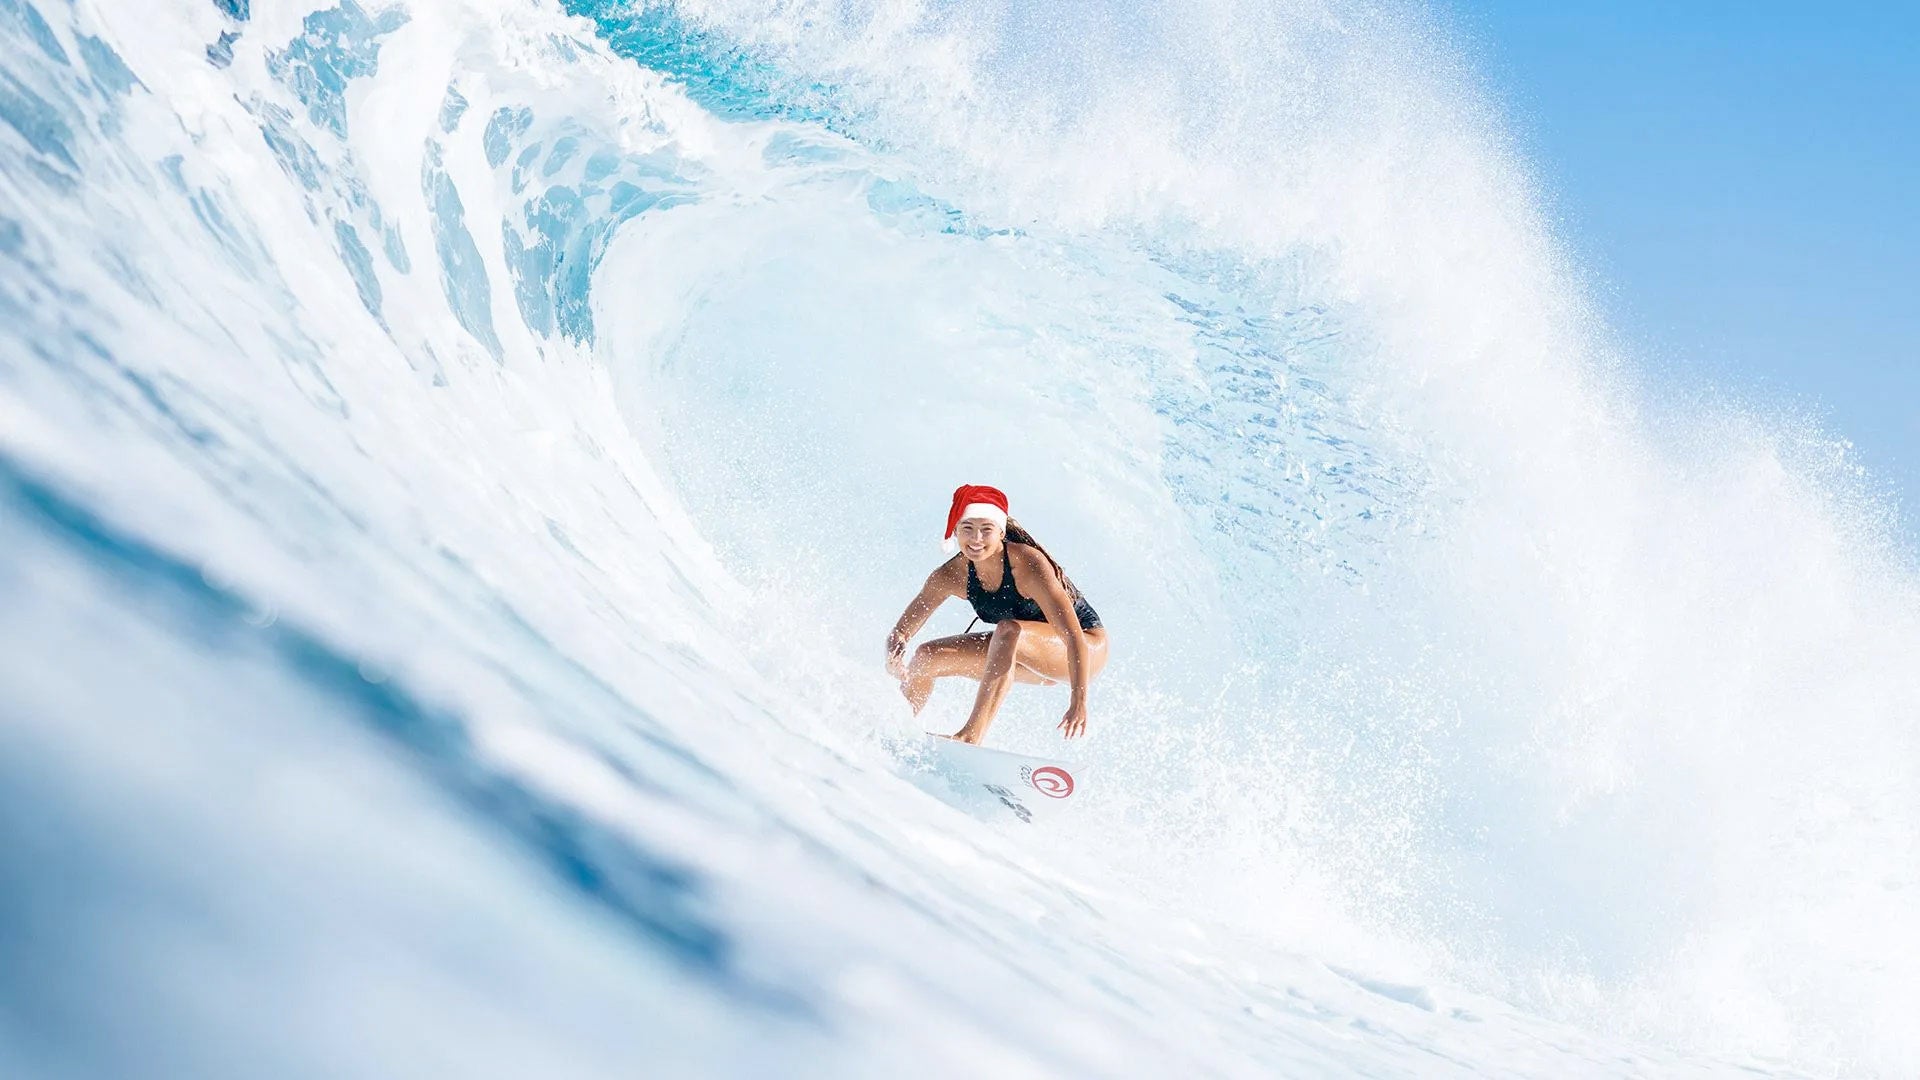 The Best Christmas Gifts for Surfers: Our Women’s Gift Guide